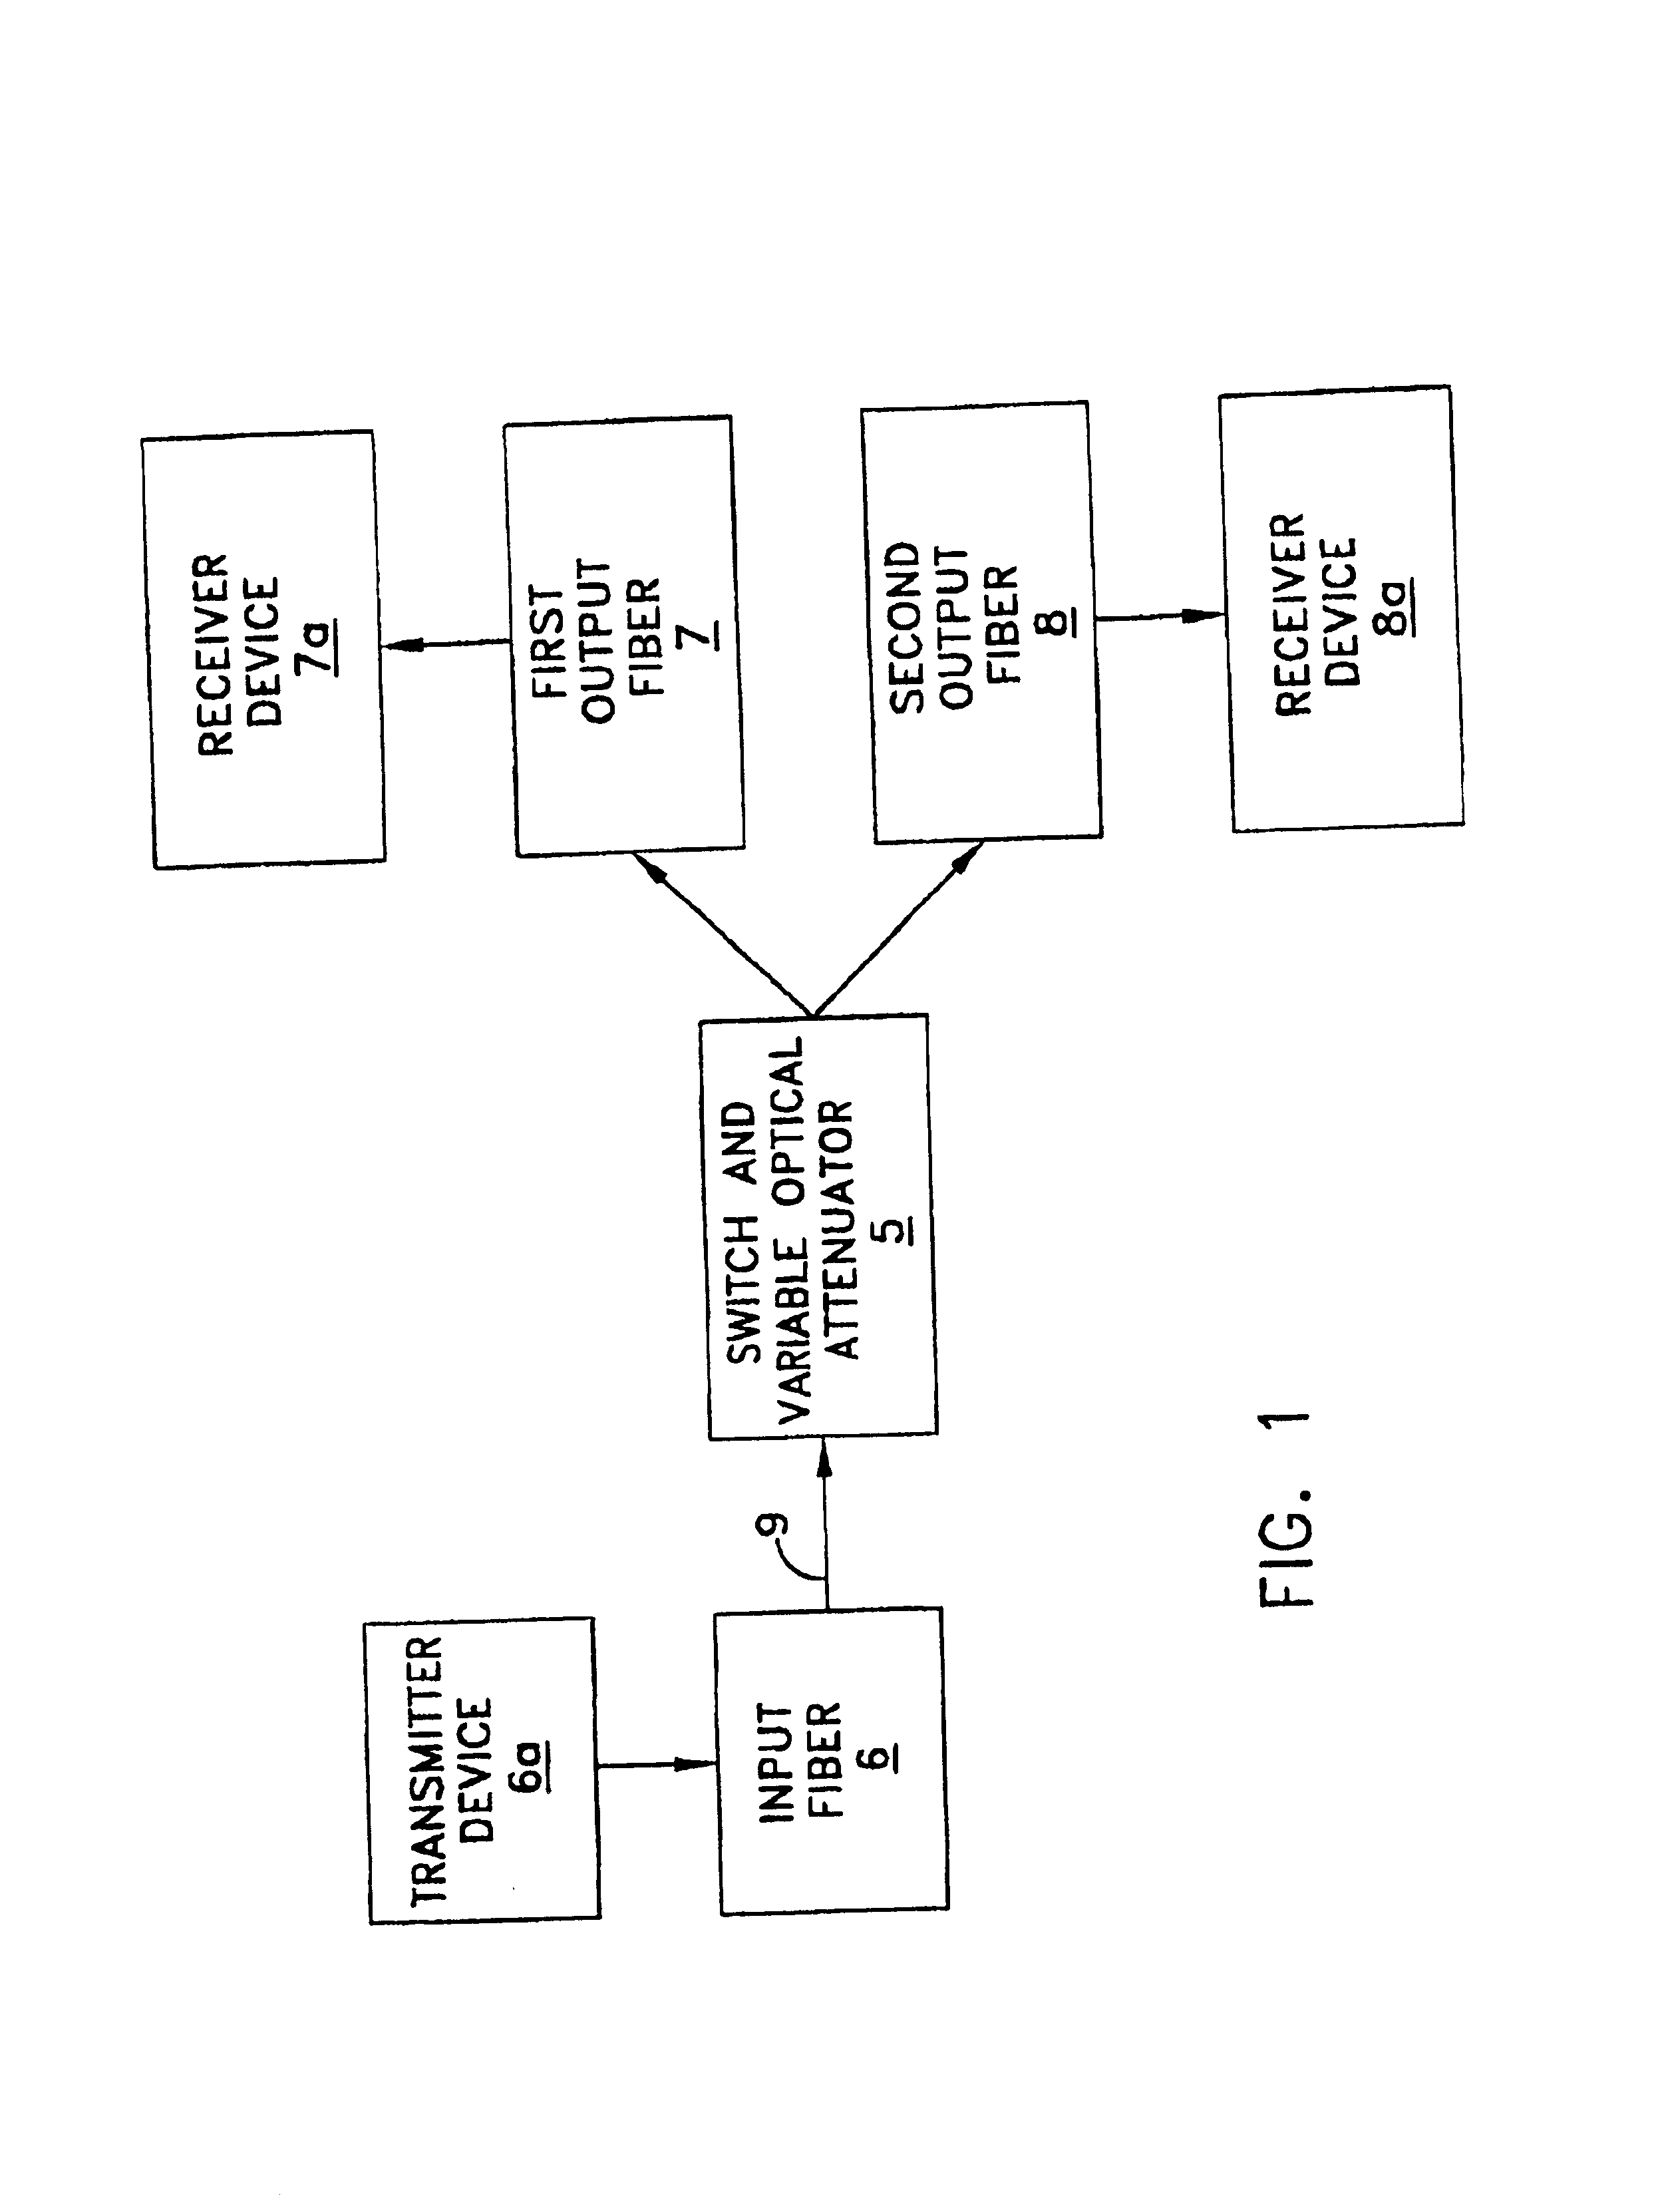 Switch-variable optical attenuator and switch arrays